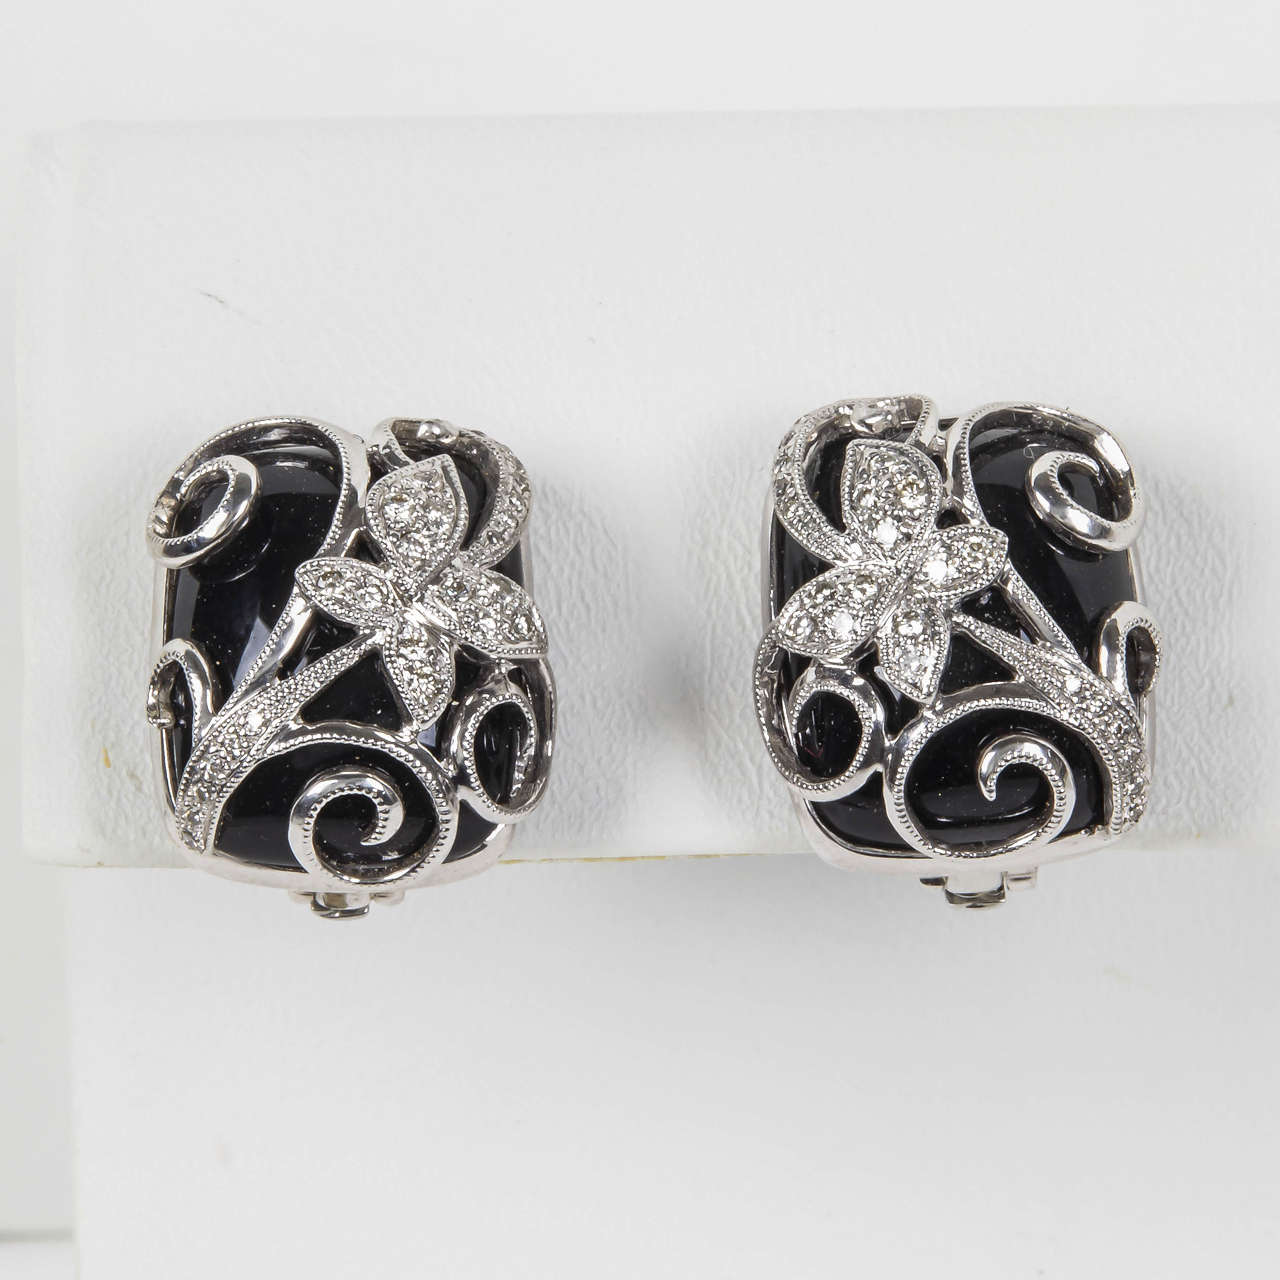 These earrings can be worn as just a clip or a post and clip, the post is hinged  and can lay flat. The butterfly and scroll design is very feminine yet the black onyx and white  gold combination is strong and bold. These are very easy to wear in